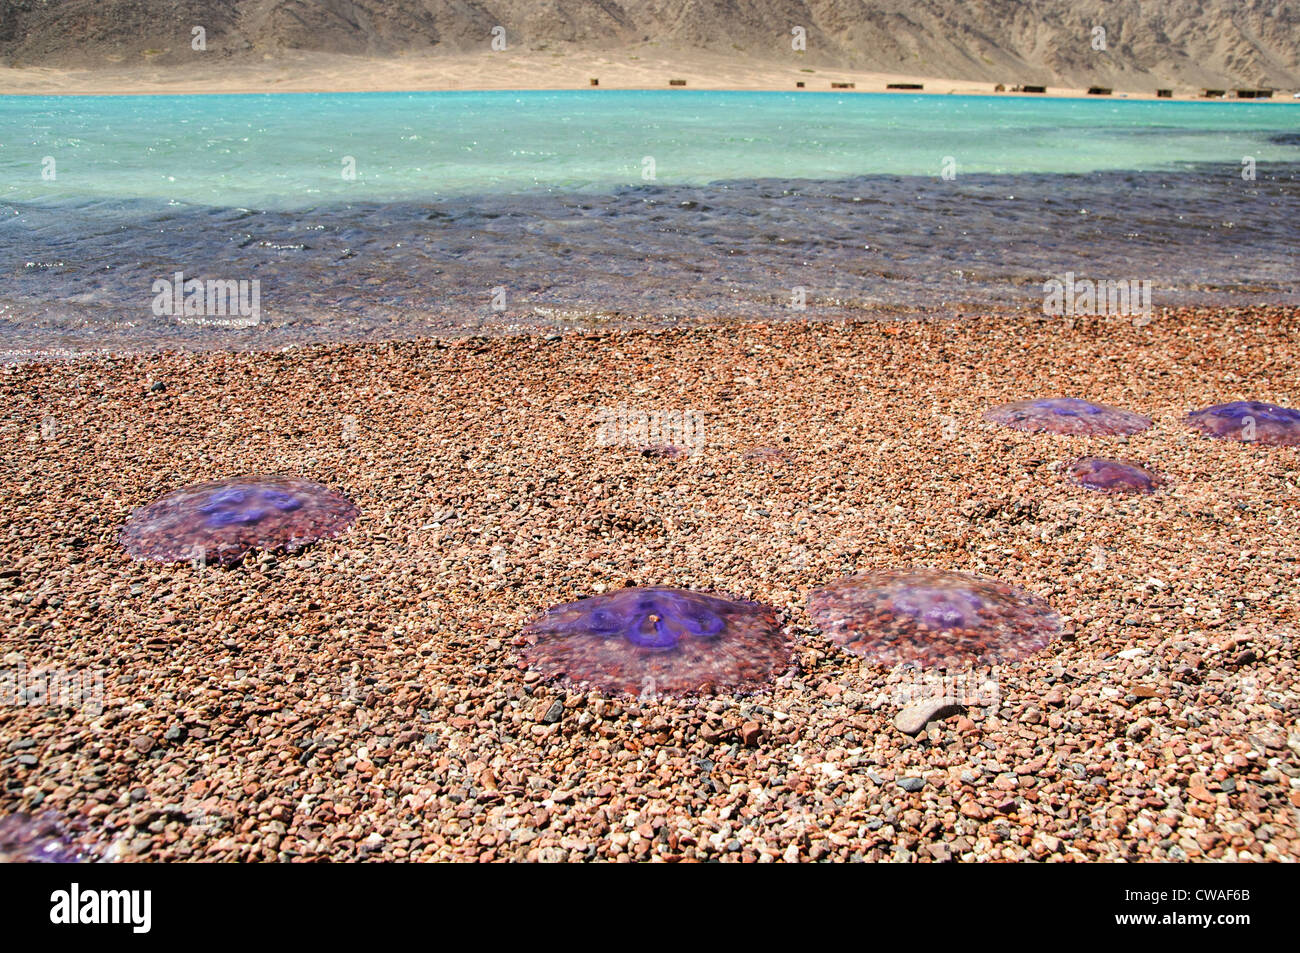 dead jellyfish on the beach of Red sea Stock Photo